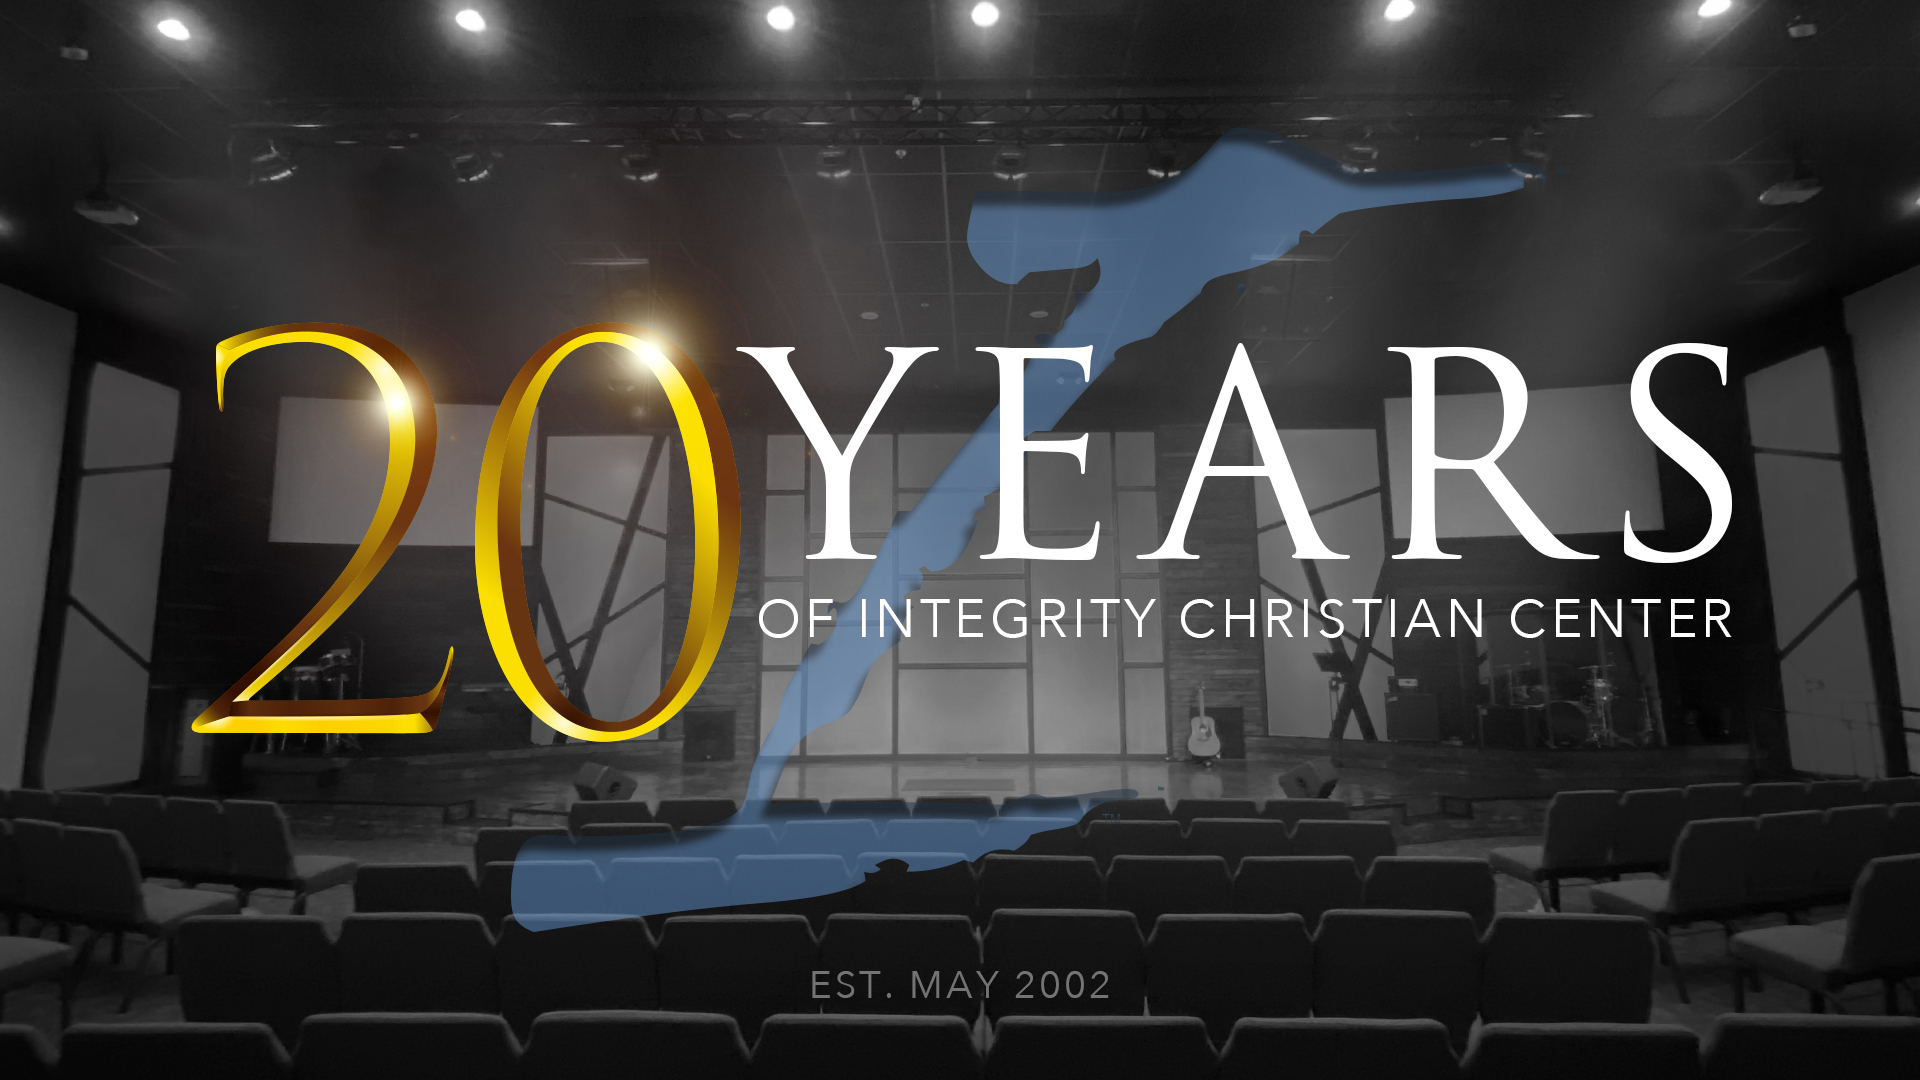 20 Years of Integrity Christian Center